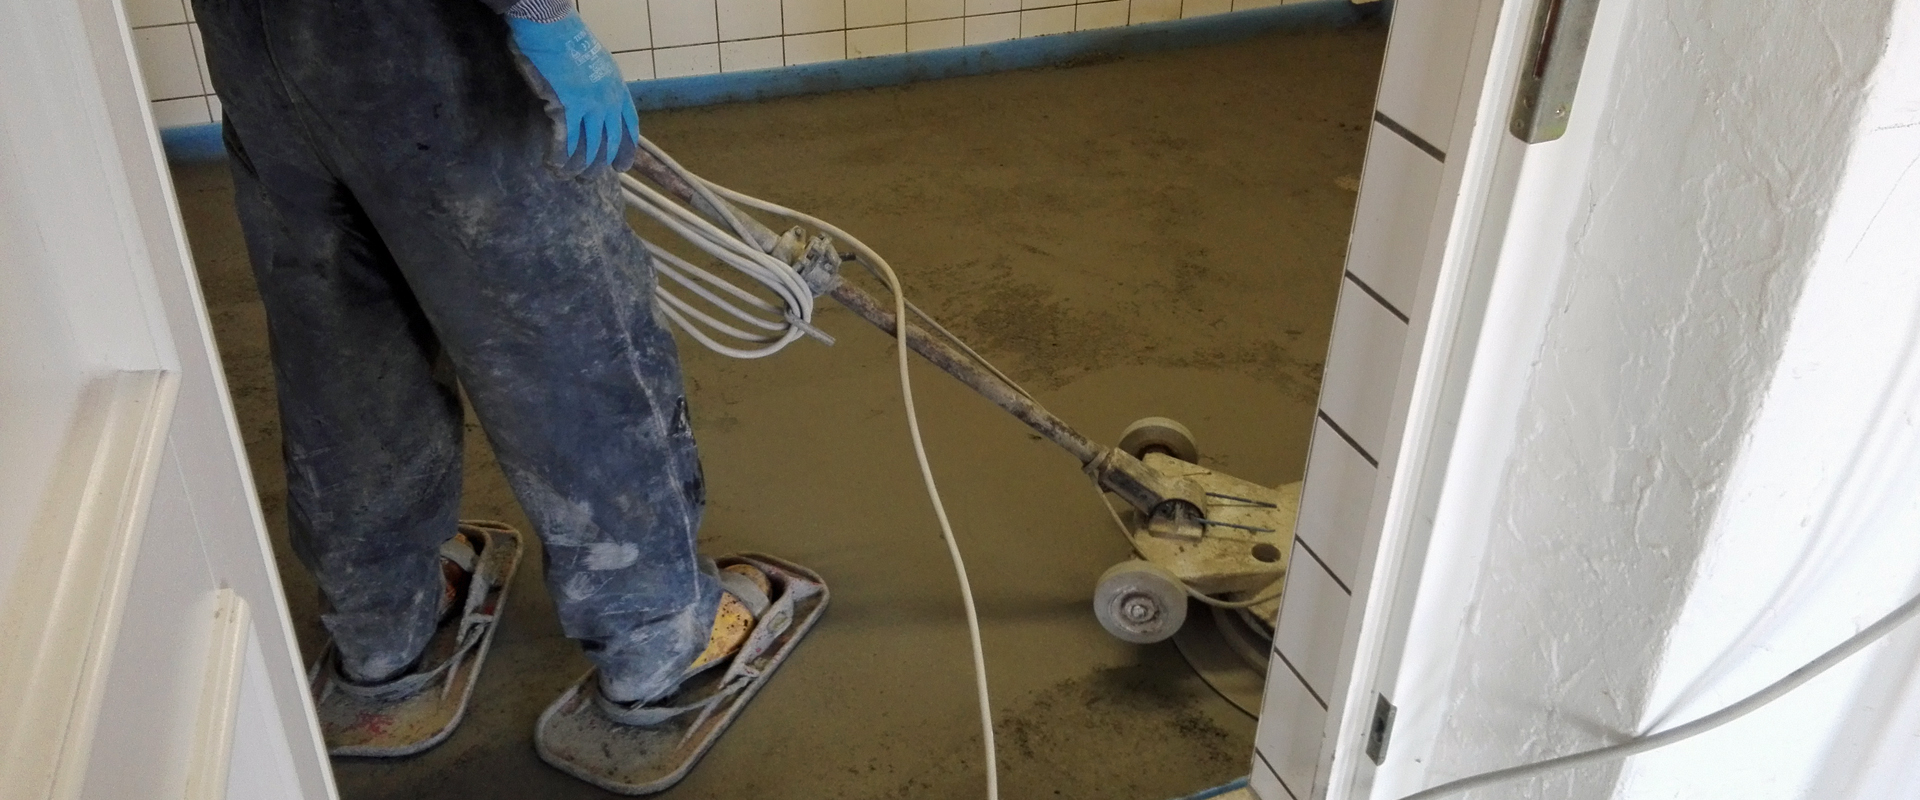 For the Kühlungsborn job, 70 kg of Powerscreed RS Binder was used per batch to ensure readiness for covering after just three days.